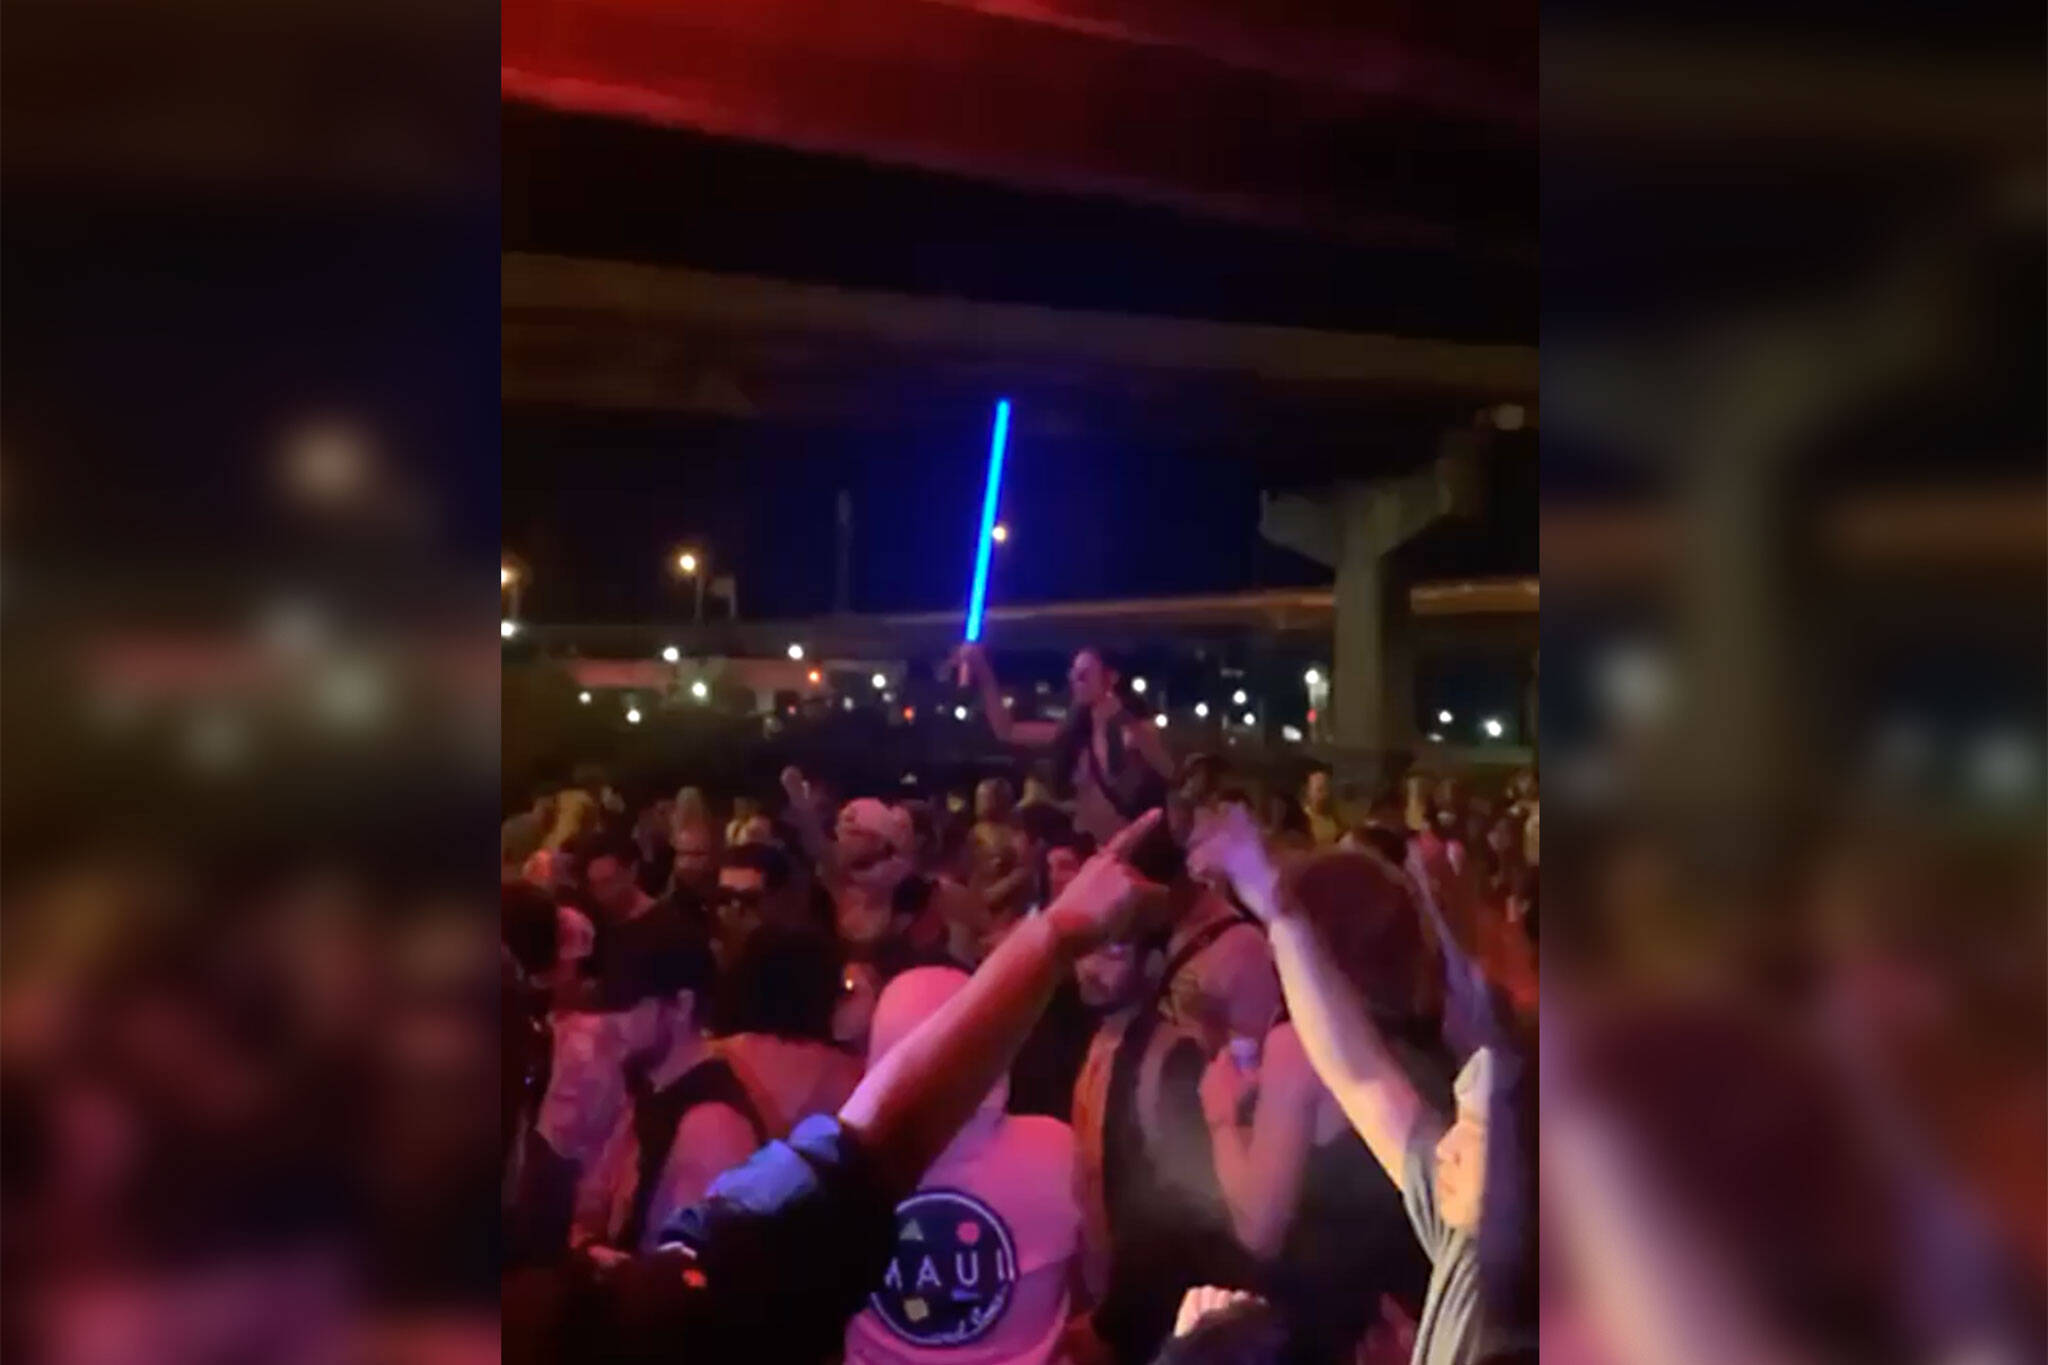 Hundreds of people attended a secret rave under a Toronto highway this